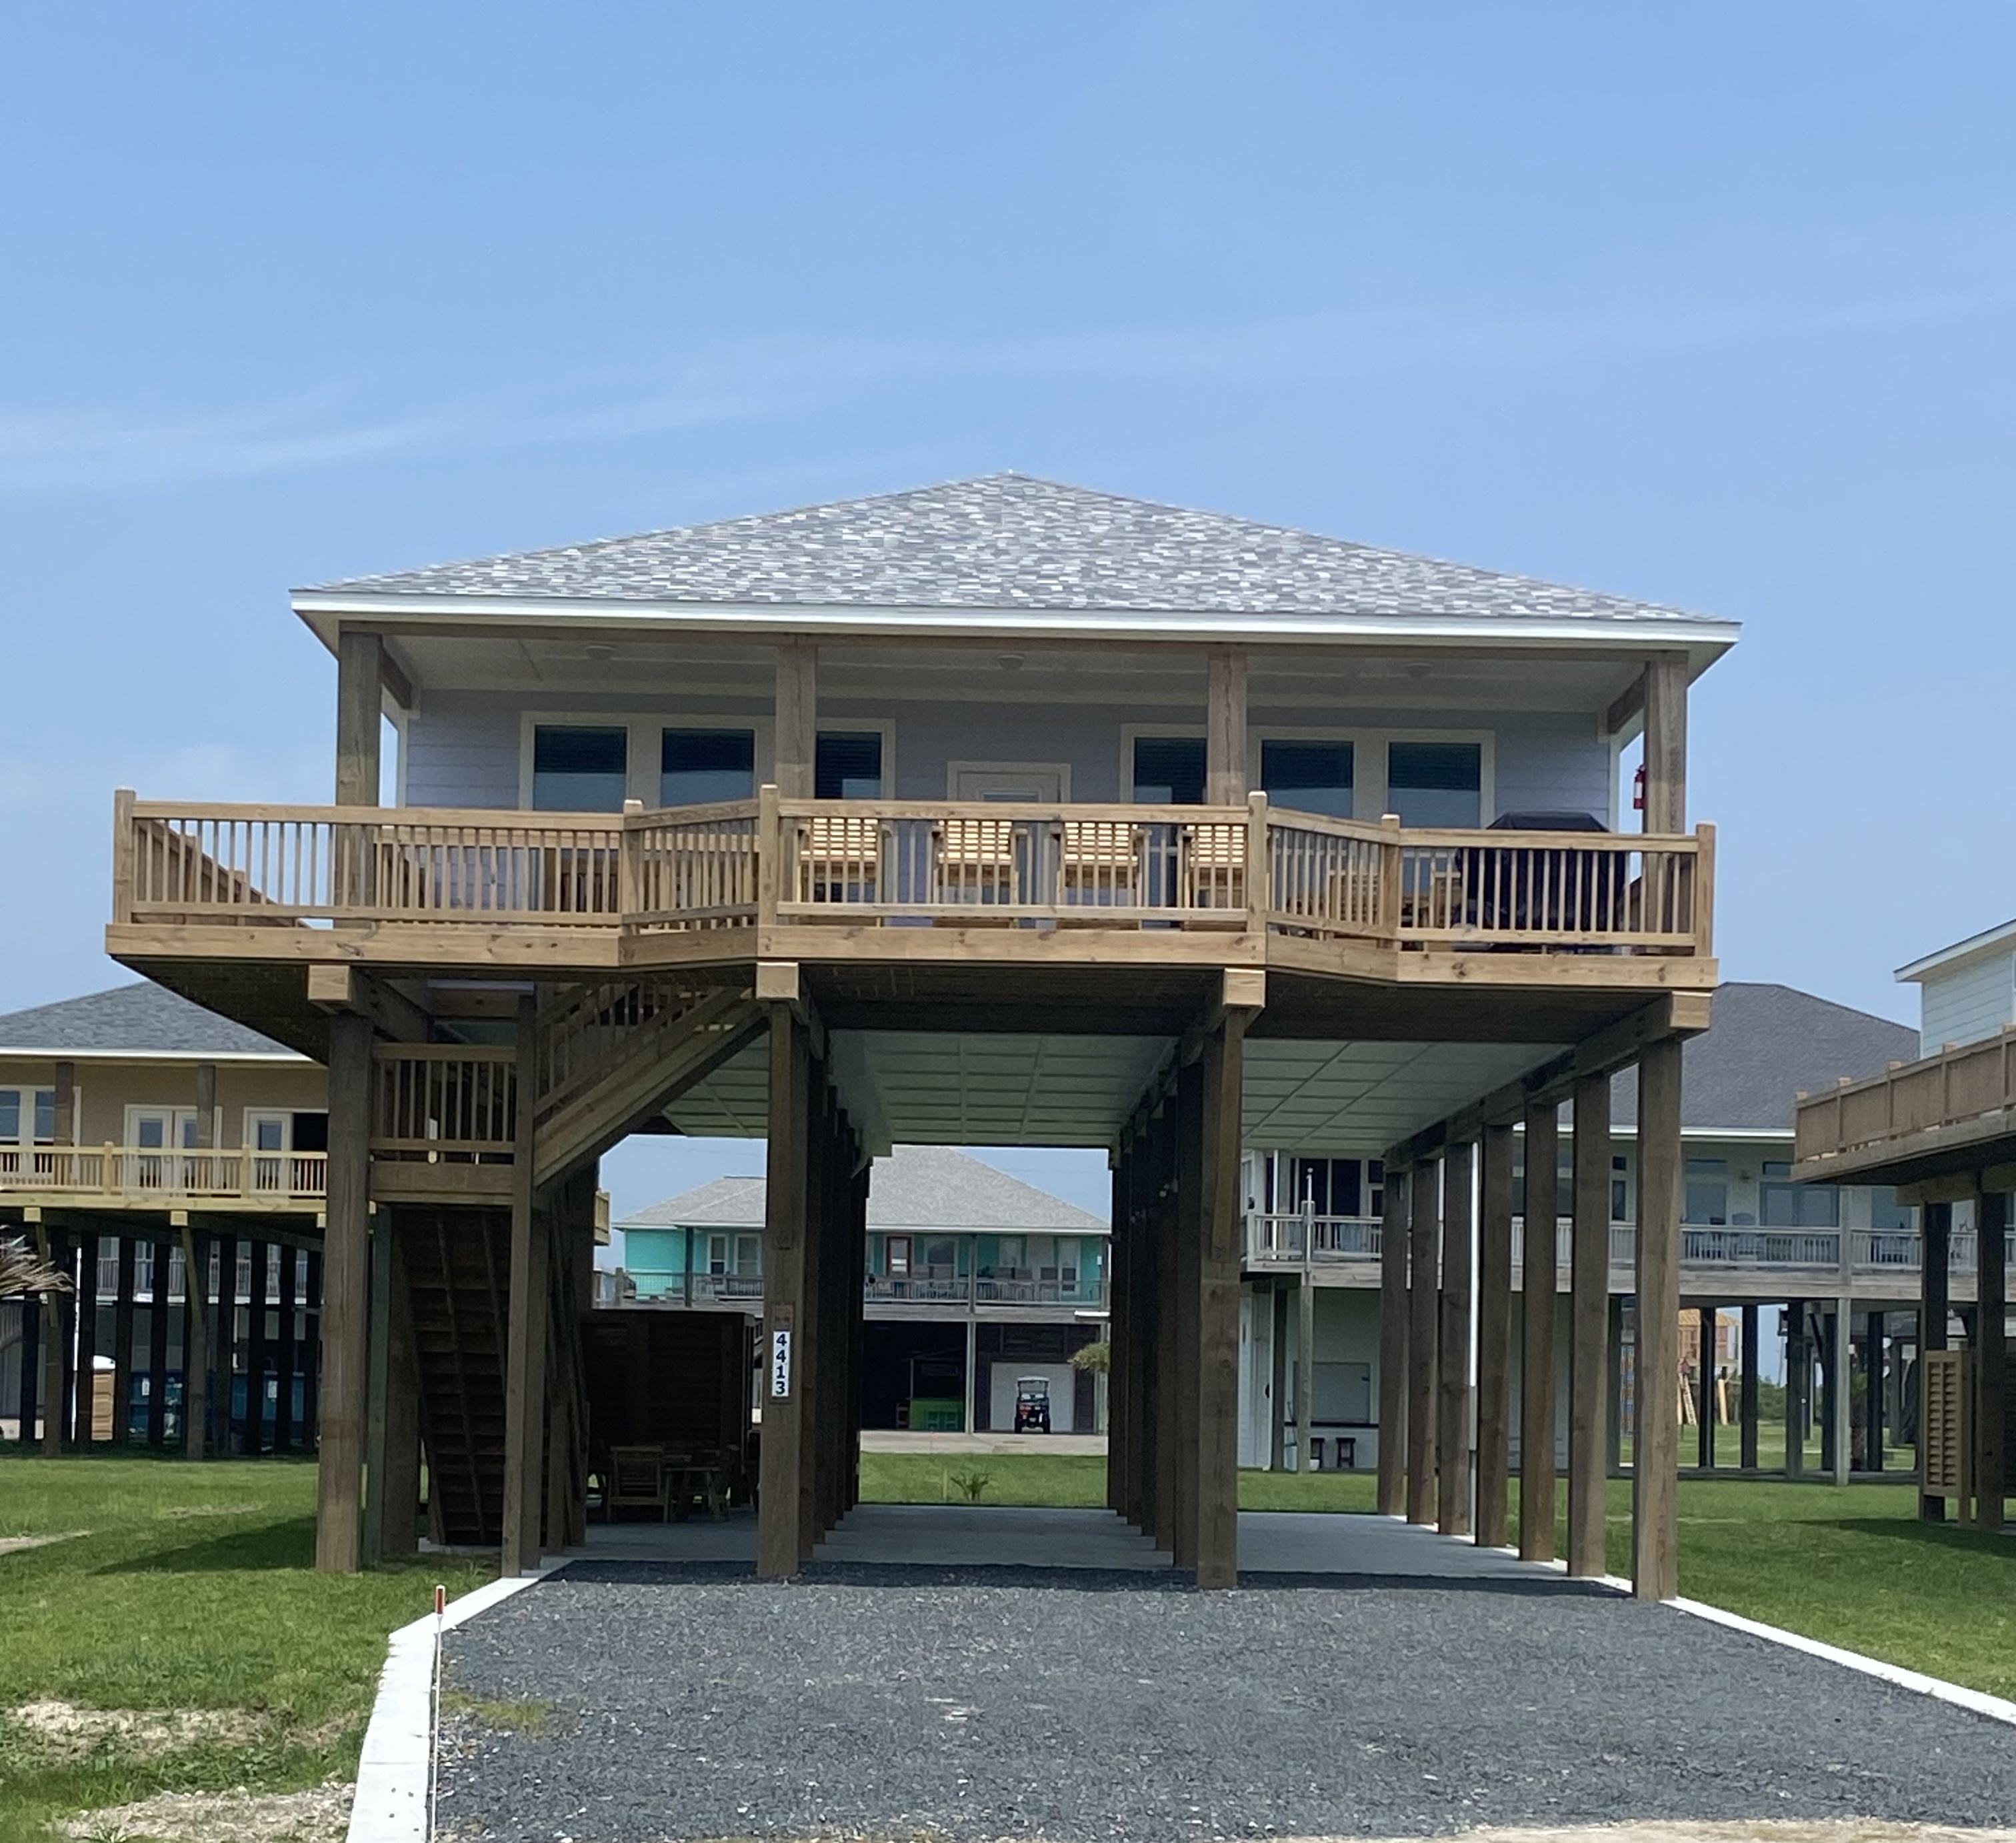 The Kraken, Brand New! 4 BR and 3.5 BTH, Ocean View, Awesome Deck